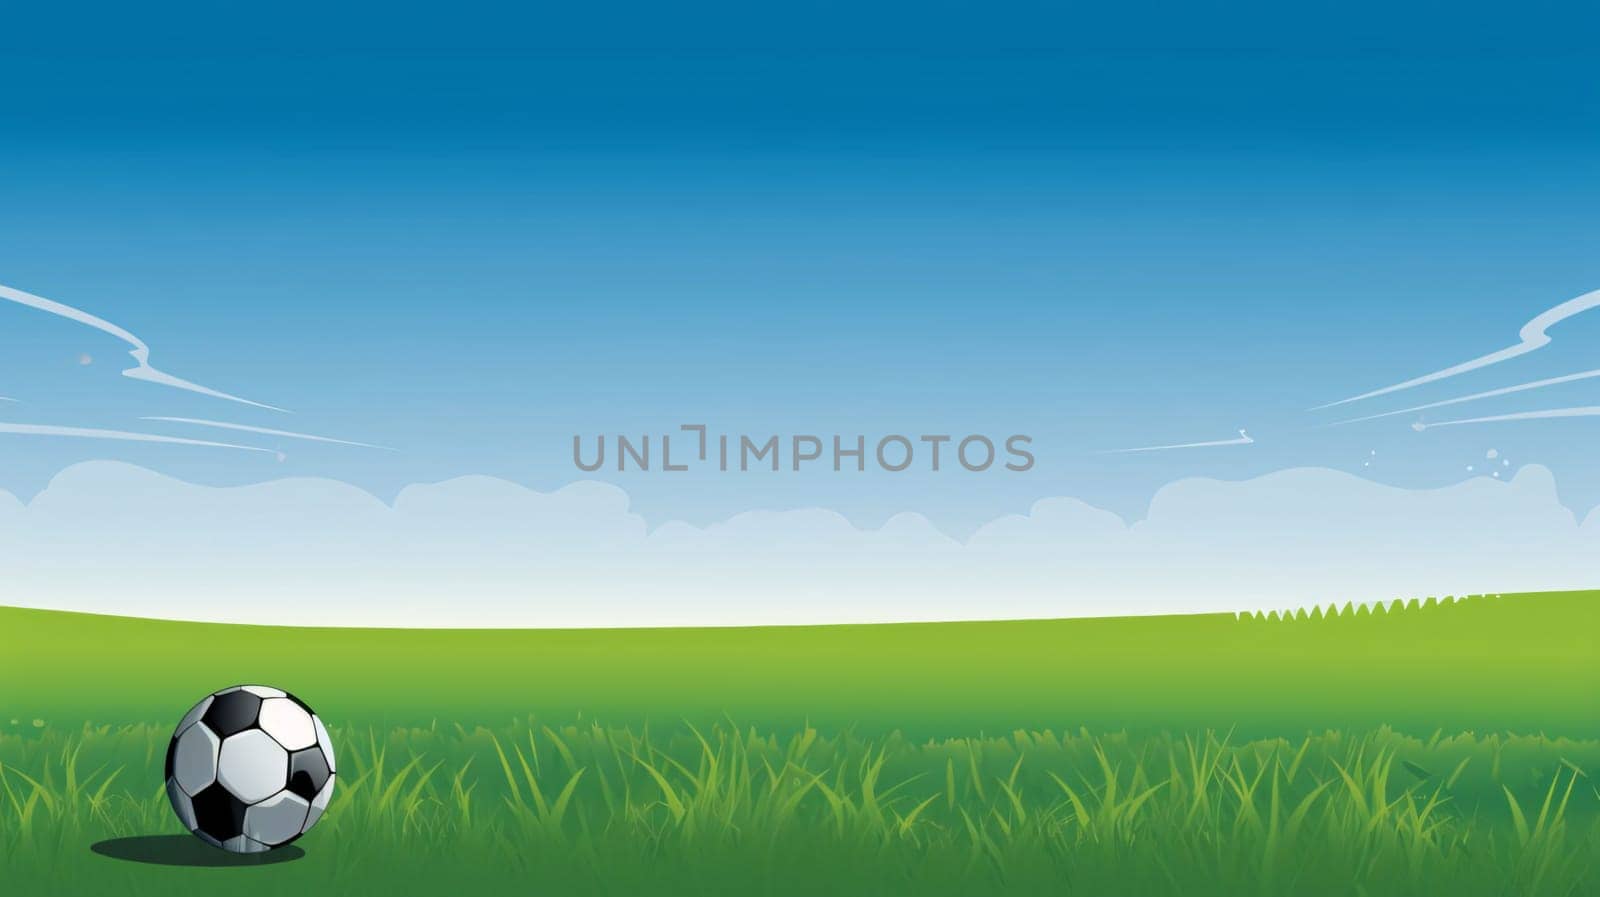 Soccer ball on green grass and blue sky background. Vector illustration. by ThemesS